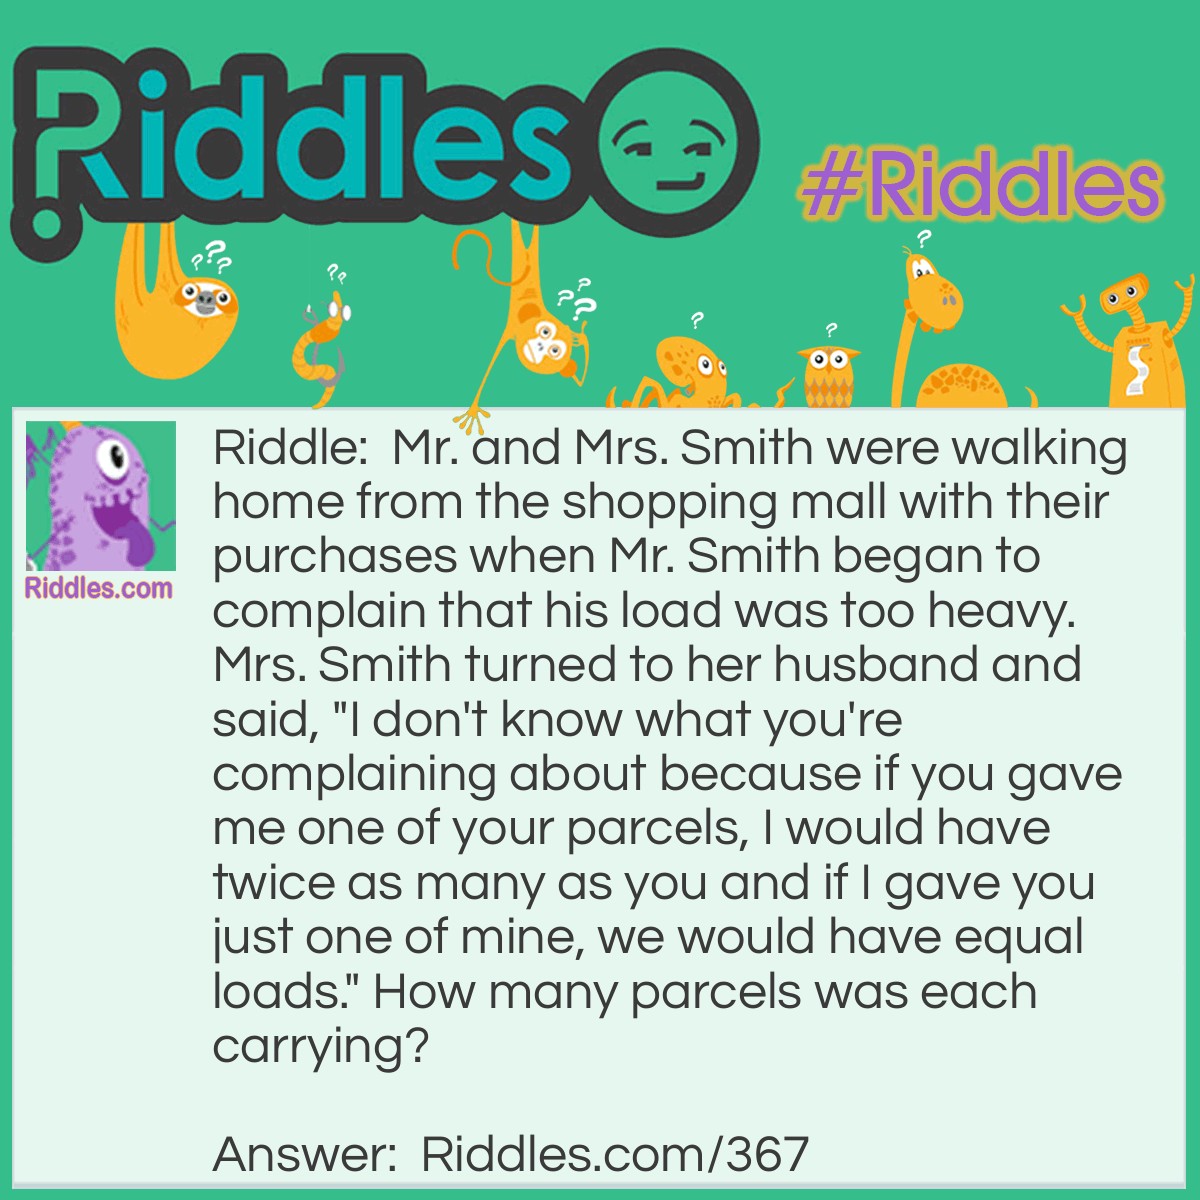 Riddle: Mr. and Mrs. Smith were walking home from the shopping mall with their purchases when Mr. Smith began to complain that his load was too heavy. Mrs. Smith turned to her husband and said, "I don't know what you're complaining about because if you gave me one of your parcels, I would have twice as many as you and if I gave you just one of mine, we would have equal loads." How many parcels was each carrying? Answer: Mrs. Smith was carrying seven parcels and Mr. Smith was carrying five.